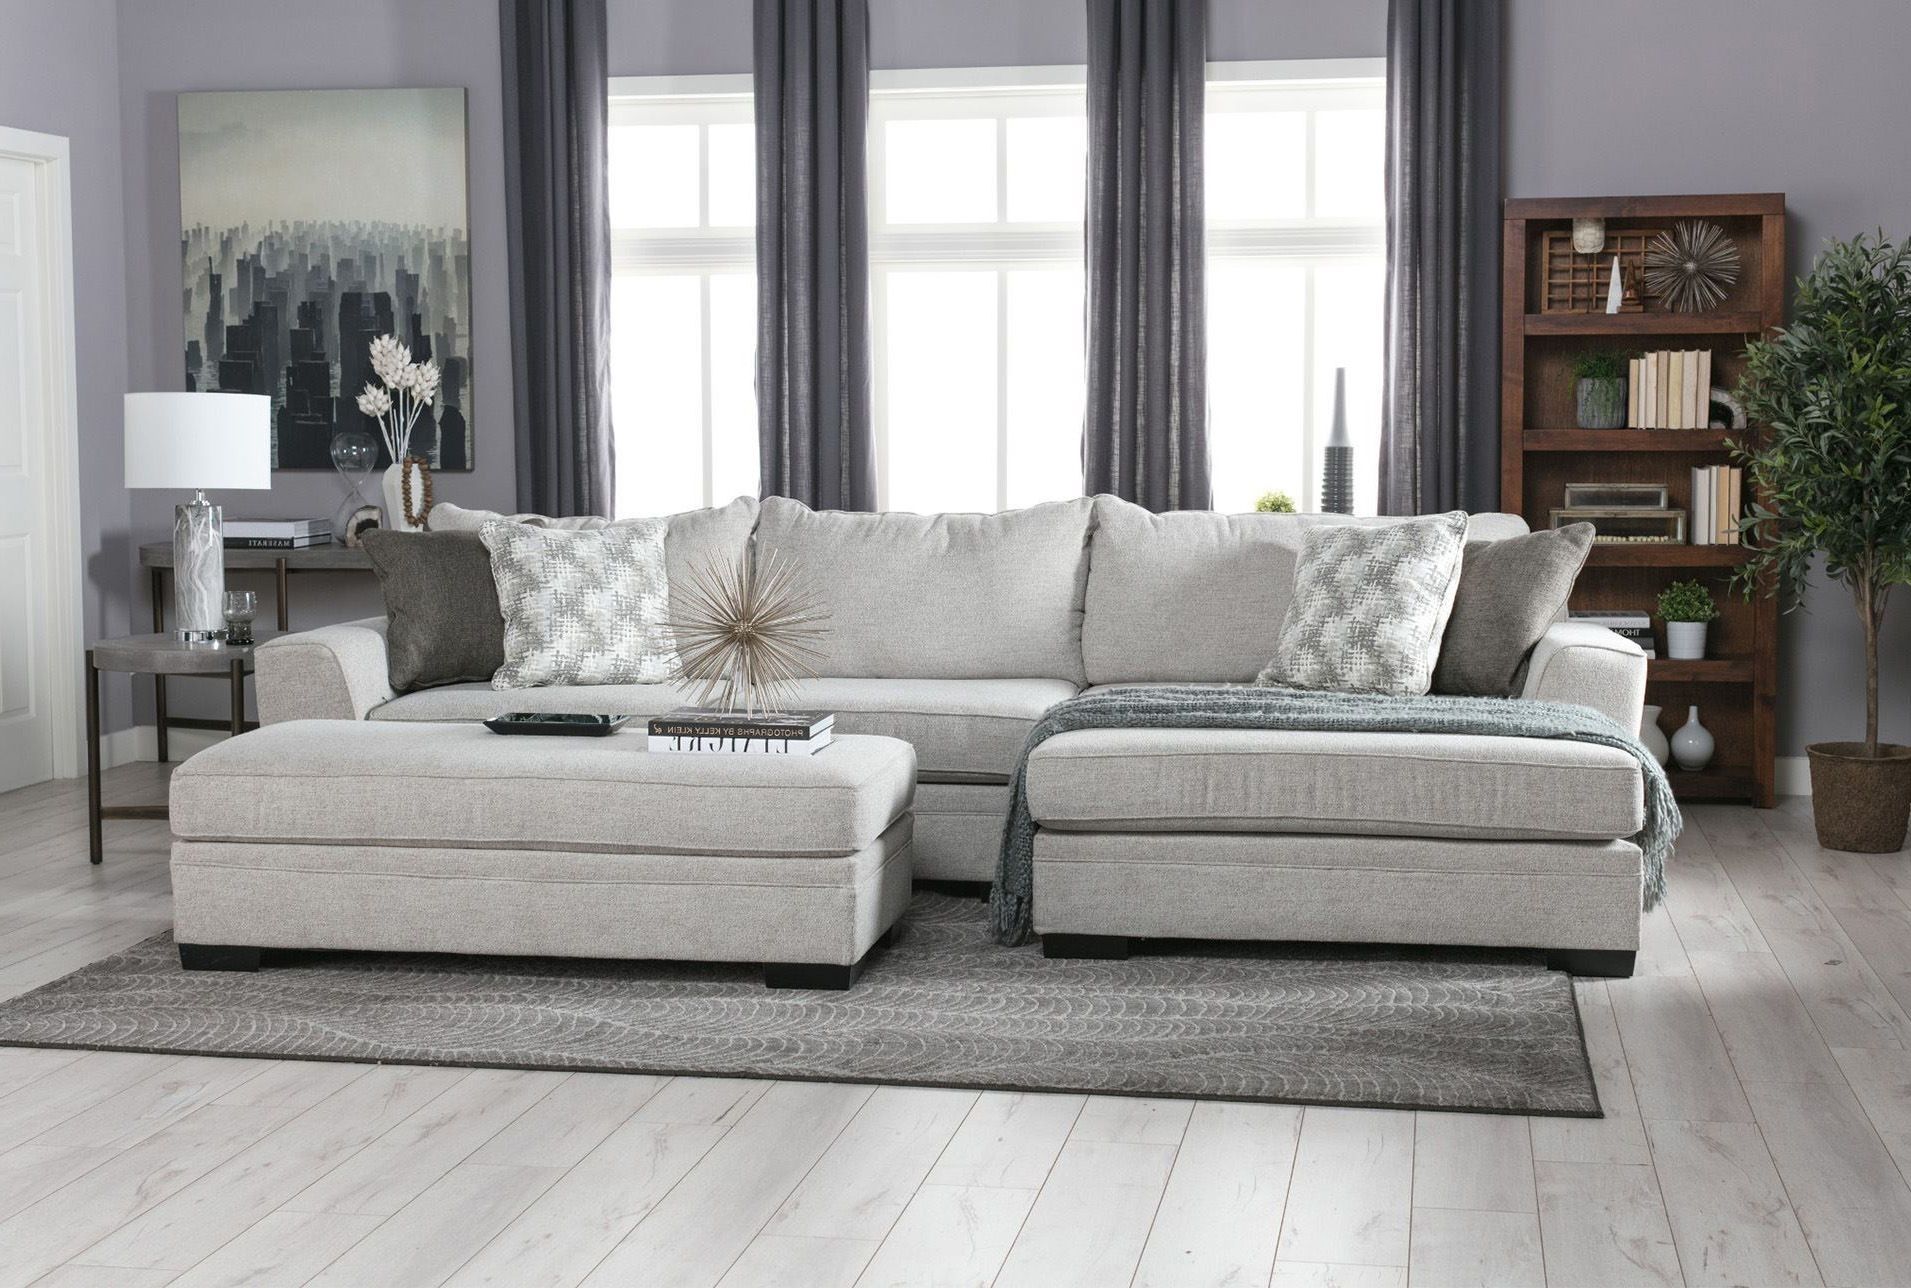 Delano 2 Piece Sectional W/raf Oversized Chaise | Living Room Ideas In Marissa Ii 3 Piece Sectionals (View 13 of 30)